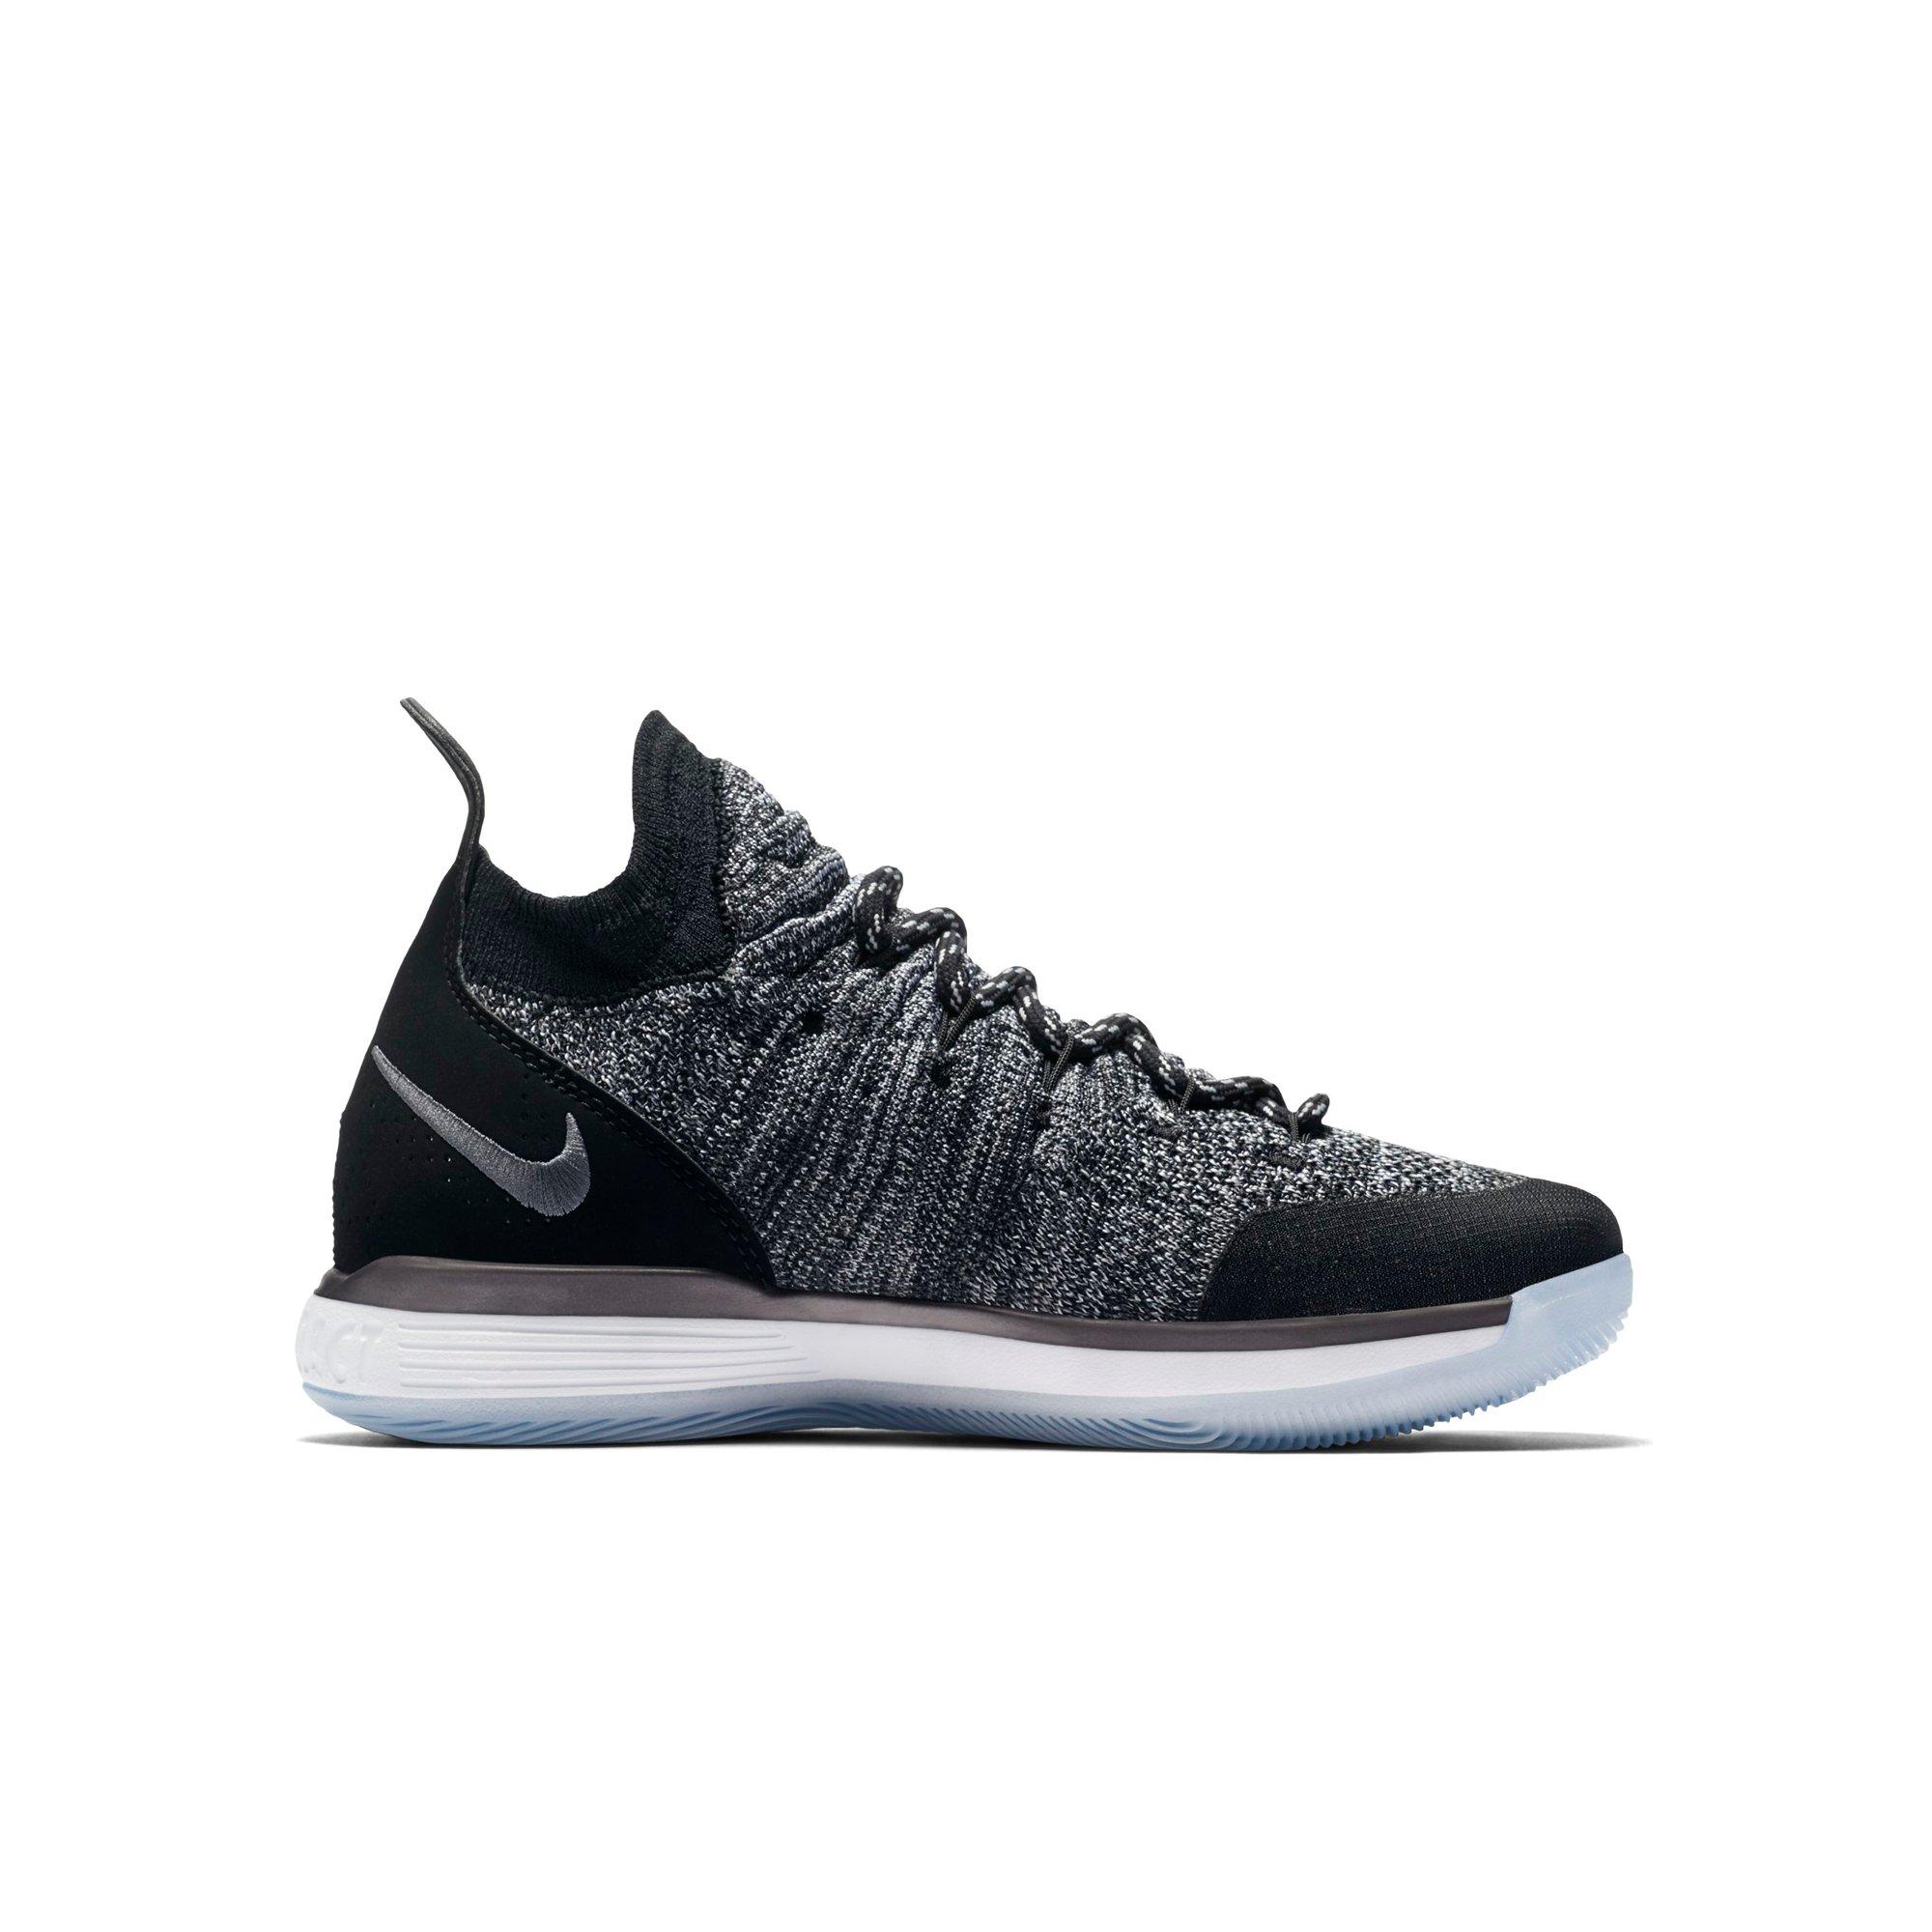 youth kd 11 basketball shoes